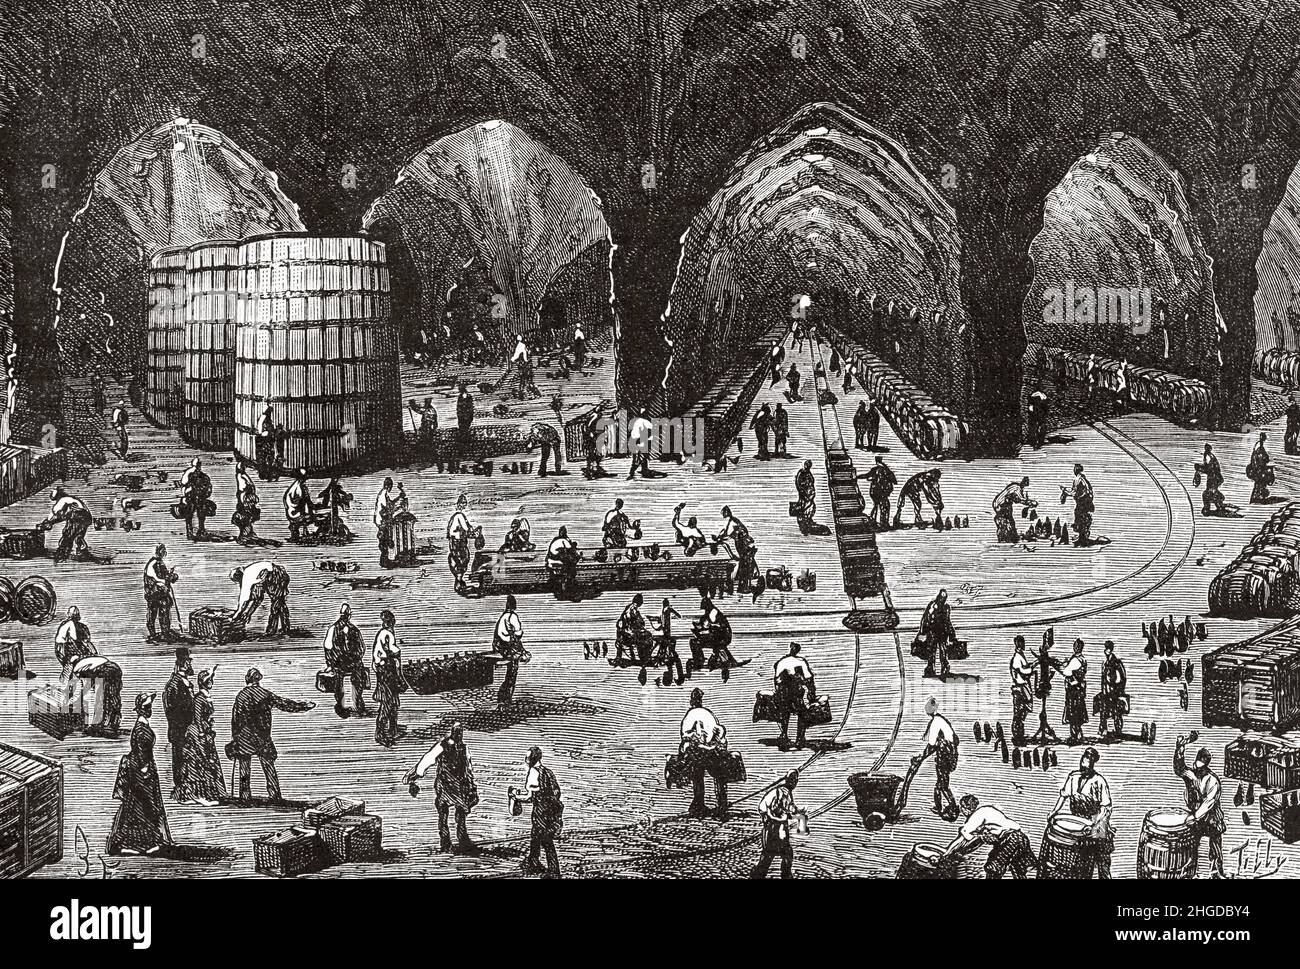 Champagne cellars E Mercier et Cie, Epernay, France. Europe. Old 19th century engraved illustration from La Nature 1884 Stock Photo